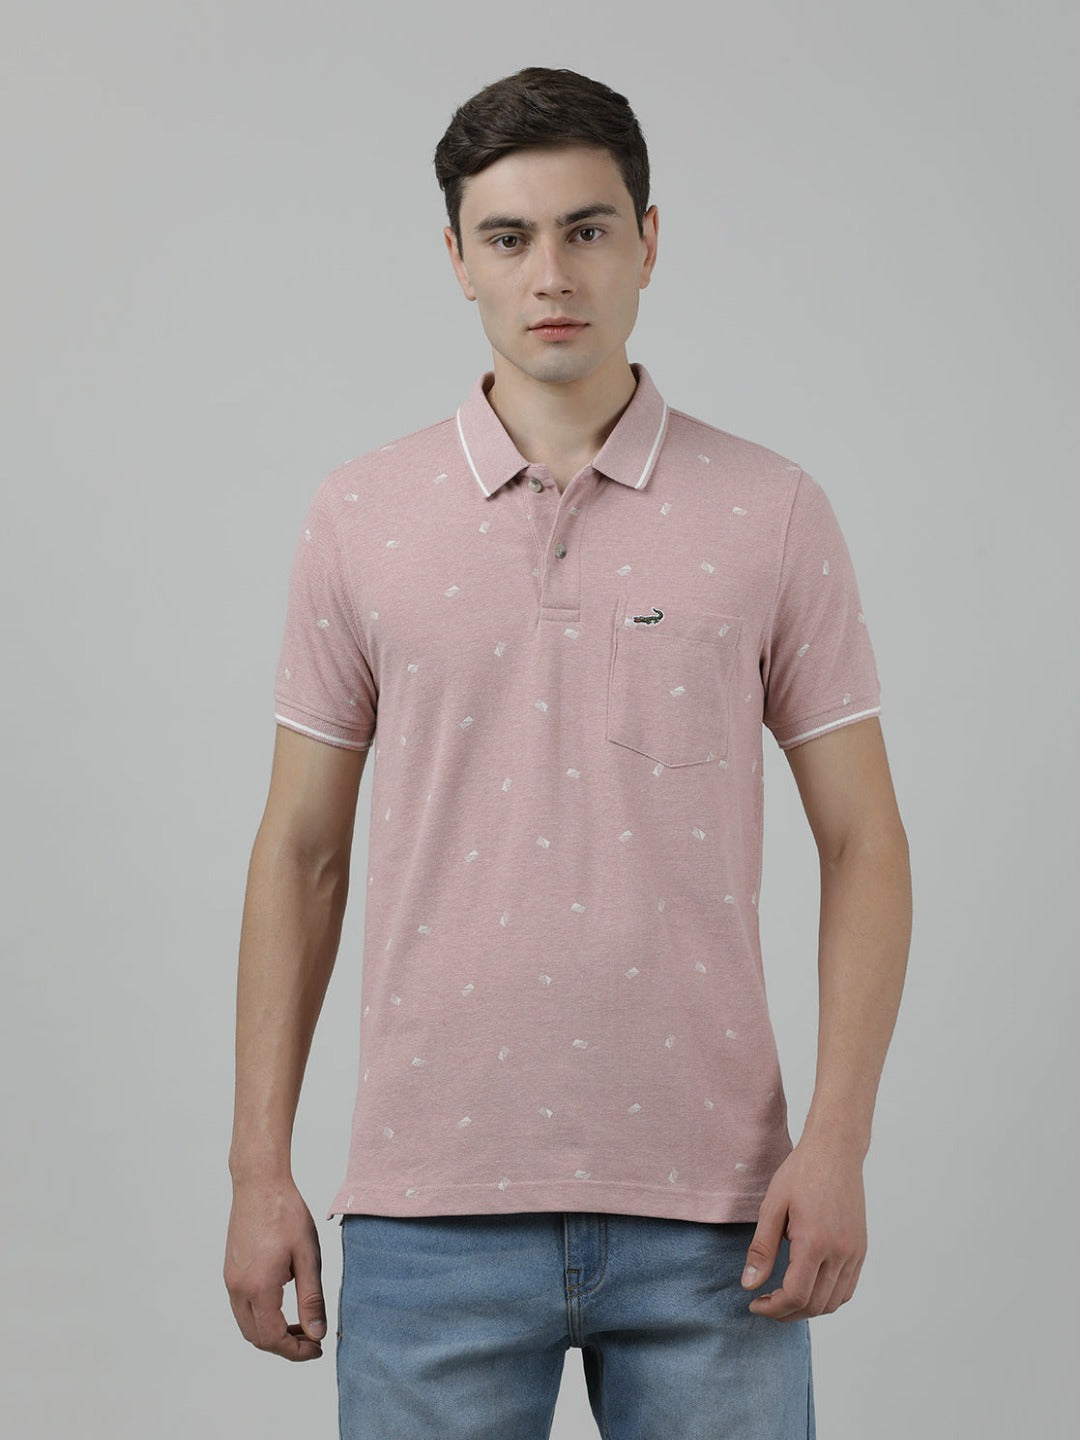 Casual Pink Printed T-Shirt Half Sleeve Slim Fit Melange with Collar for Men